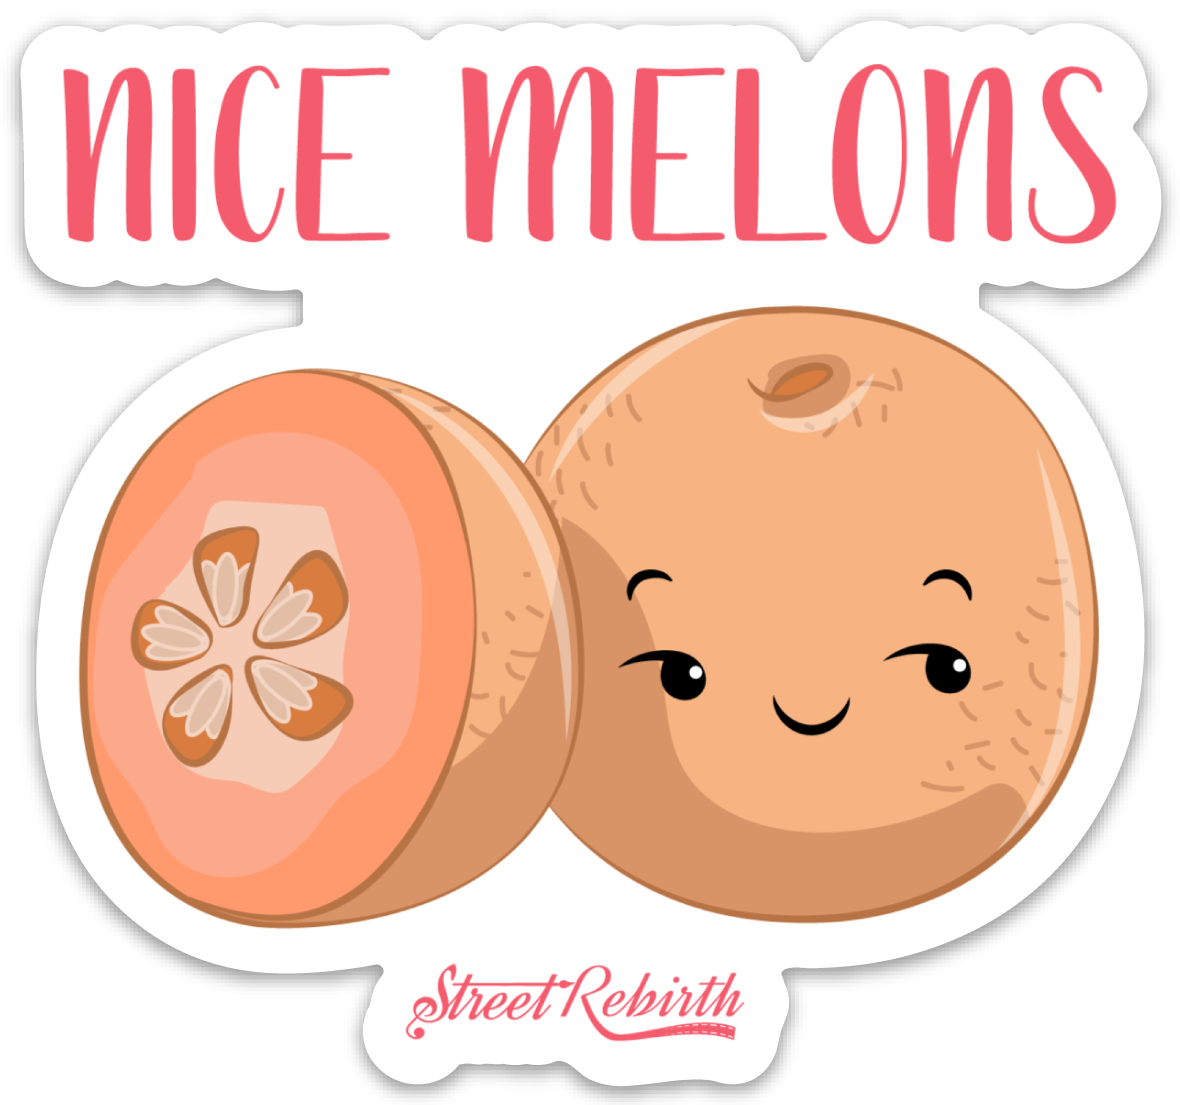 NICE MELONS PUN STICKER – ONE 4 INCH WATER PROOF VINYL STICKER – FOR HYDRO FLASK, SKATEBOARD, LAPTOP, PLANNER, CAR, COLLECTING, GIFTING